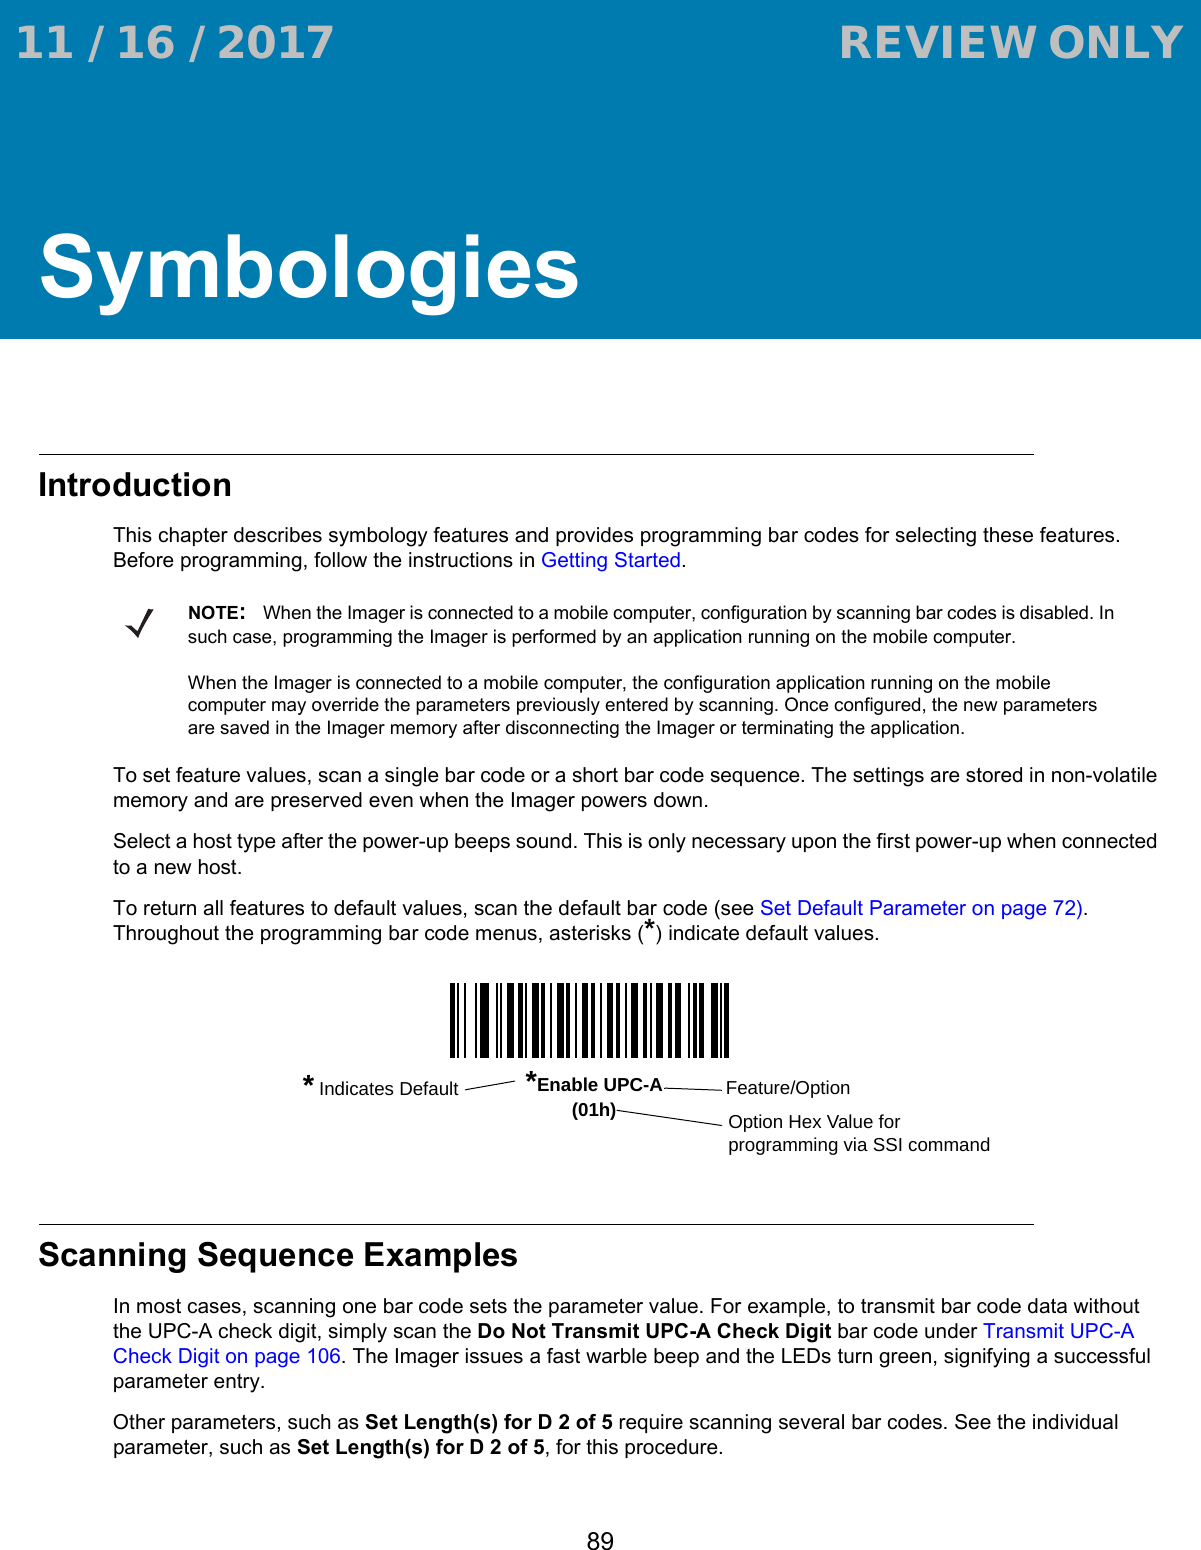 89SymbologiesIntroductionThis chapter describes symbology features and provides programming bar codes for selecting these features. Before programming, follow the instructions in Getting Started.To set feature values, scan a single bar code or a short bar code sequence. The settings are stored in non-volatile memory and are preserved even when the Imager powers down.Select a host type after the power-up beeps sound. This is only necessary upon the first power-up when connected to a new host.To return all features to default values, scan the default bar code (see Set Default Parameter on page 72). Throughout the programming bar code menus, asterisks (*) indicate default values.Scanning Sequence ExamplesIn most cases, scanning one bar code sets the parameter value. For example, to transmit bar code data without the UPC-A check digit, simply scan the Do Not Transmit UPC-A Check Digit bar code under Transmit UPC-A Check Digit on page 106. The Imager issues a fast warble beep and the LEDs turn green, signifying a successful parameter entry.Other parameters, such as Set Length(s) for D 2 of 5 require scanning several bar codes. See the individual parameter, such as Set Length(s) for D 2 of 5, for this procedure.NOTE:When the Imager is connected to a mobile computer, configuration by scanning bar codes is disabled. In such case, programming the Imager is performed by an application running on the mobile computer. When the Imager is connected to a mobile computer, the configuration application running on the mobile computer may override the parameters previously entered by scanning. Once configured, the new parameters are saved in the Imager memory after disconnecting the Imager or terminating the application.*Enable UPC-A(01h) Feature/Option* Indicates DefaultOption Hex Value for programming via SSI command 11 / 16 / 2017                                  REVIEW ONLY                             REVIEW ONLY - REVIEW ONLY - REVIEW ONLY